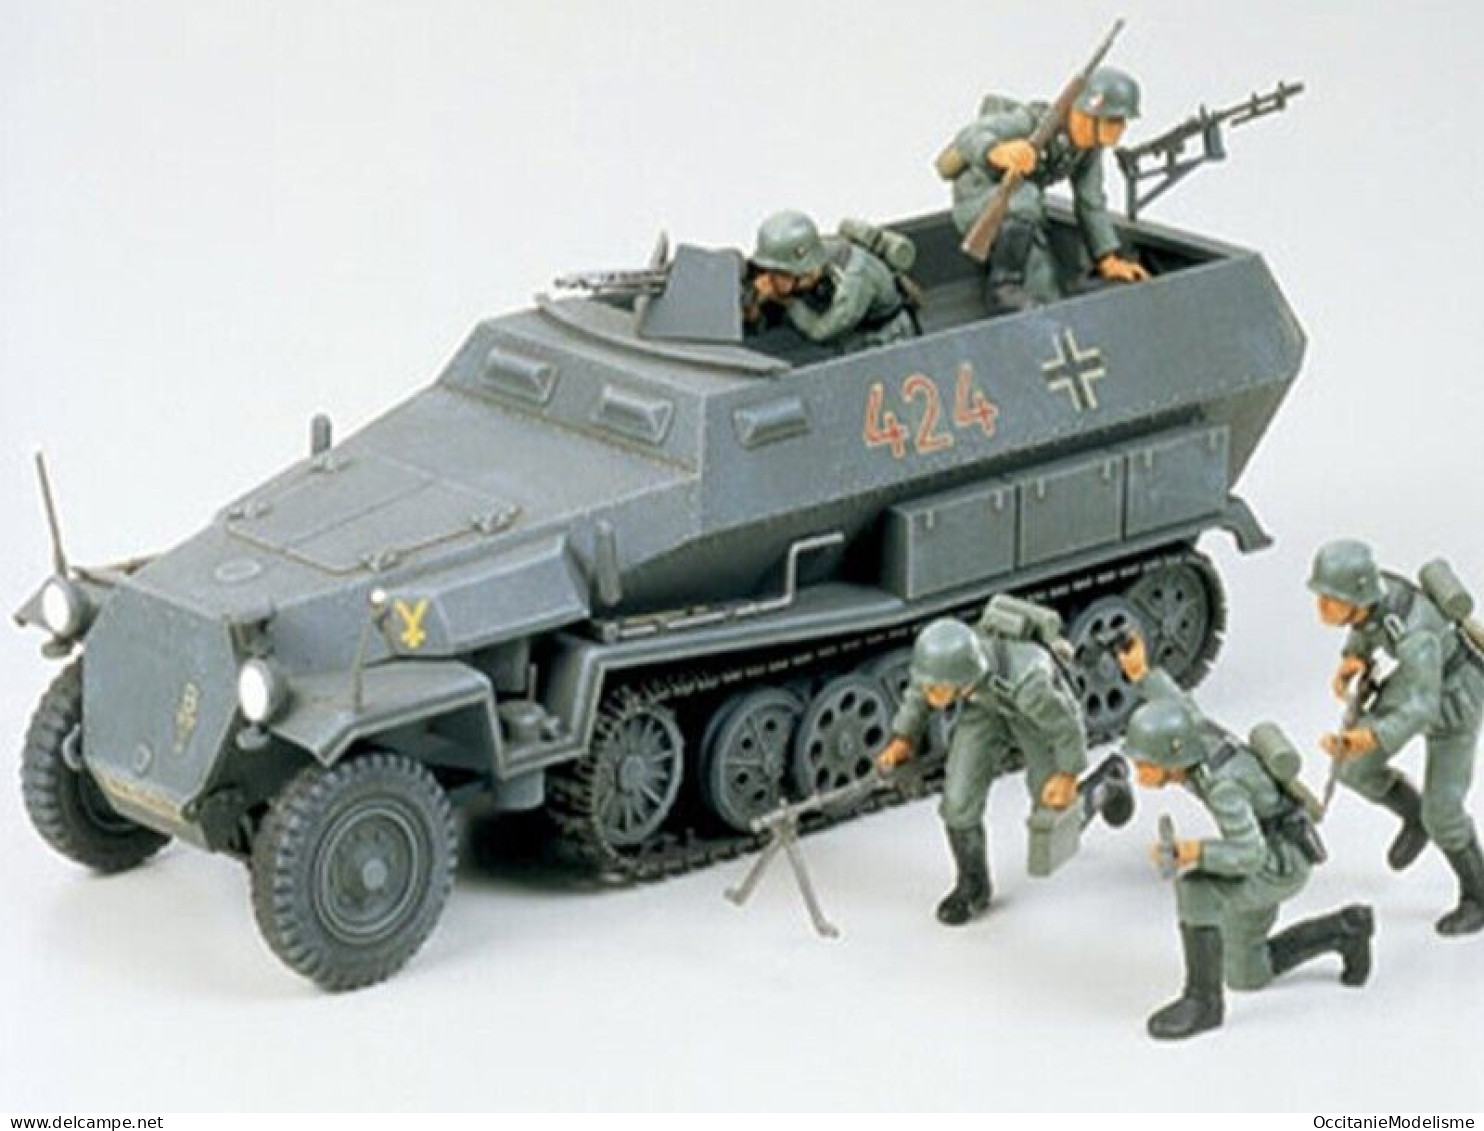 Tamiya - HANOMAG Sdkfz 251/1 + 5 Figurines WWII Militaire Maquette Kit Plastique Réf. 35020 BO 1/35 - Véhicules Militaires